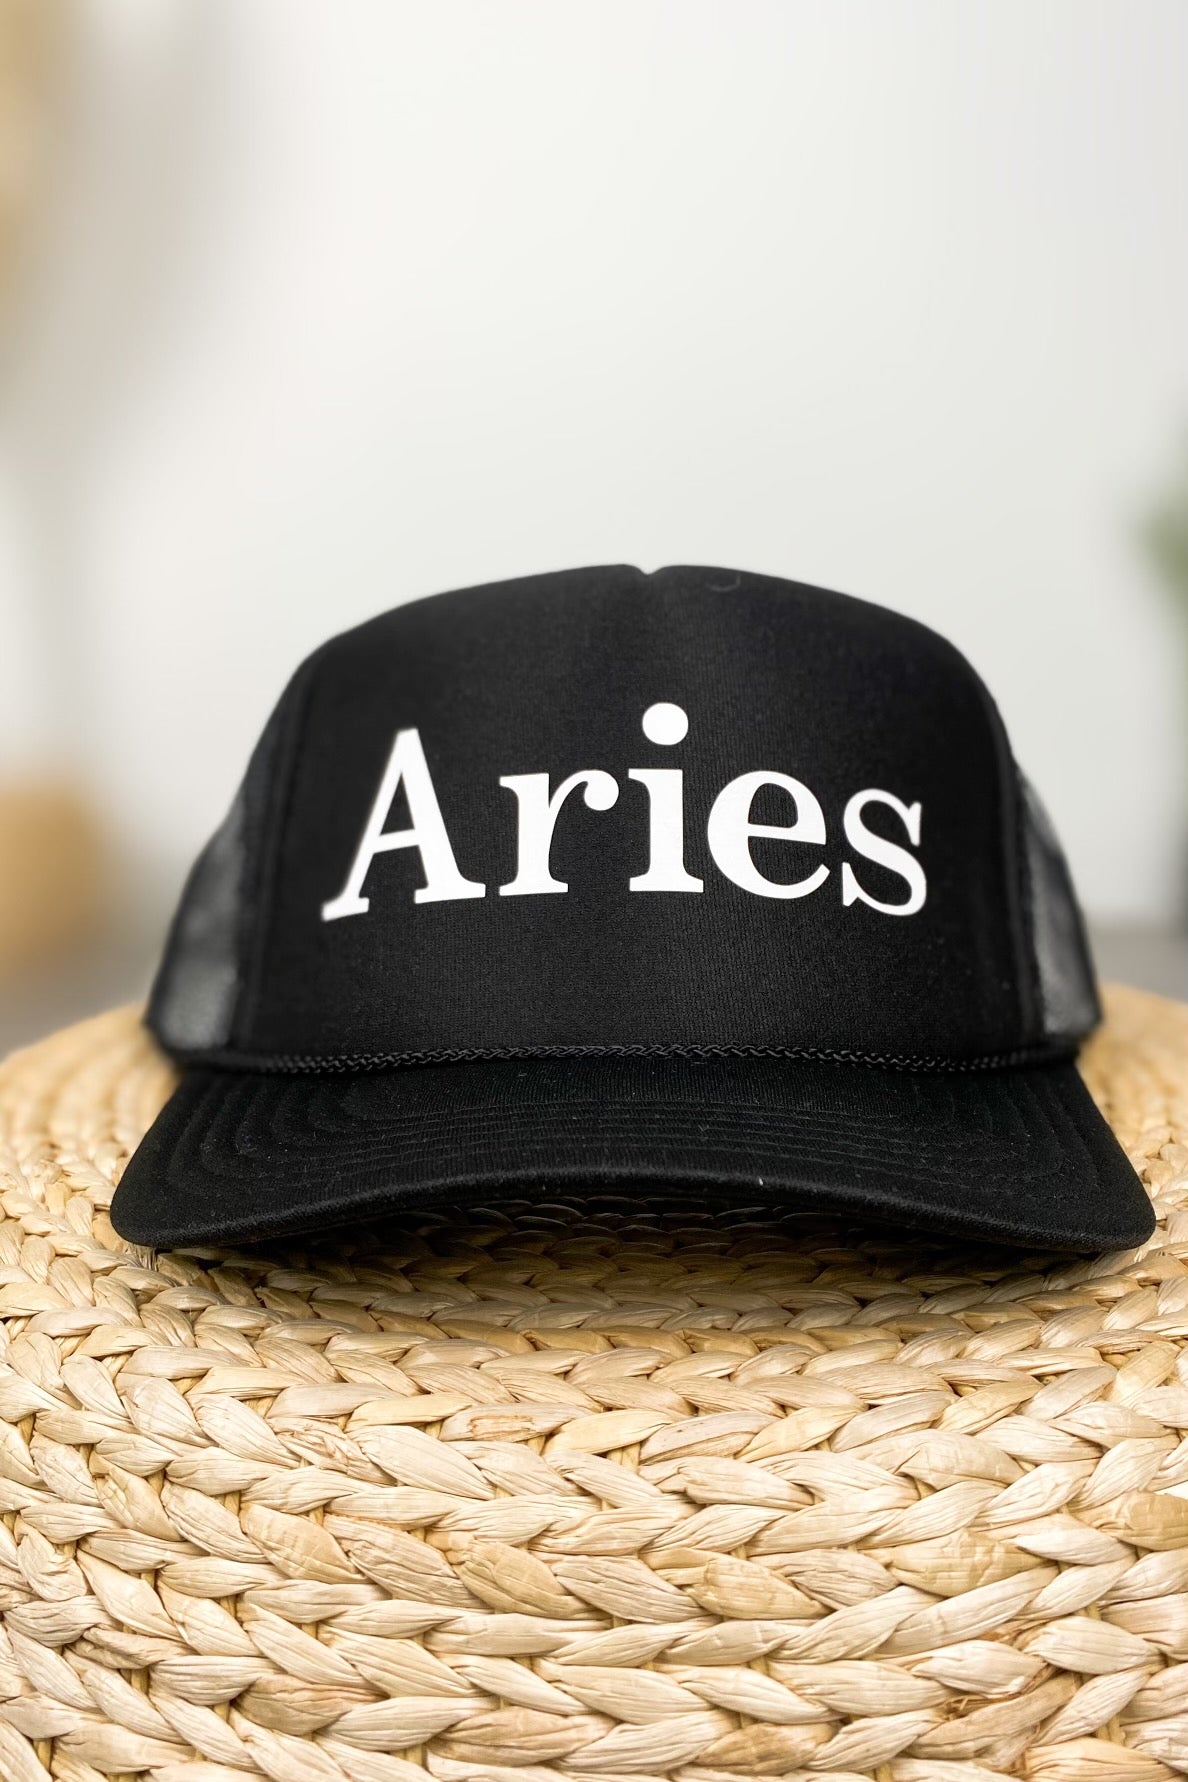 Aries trucker hat black - Trendy Hats at Lush Fashion Lounge Boutique in Oklahoma City